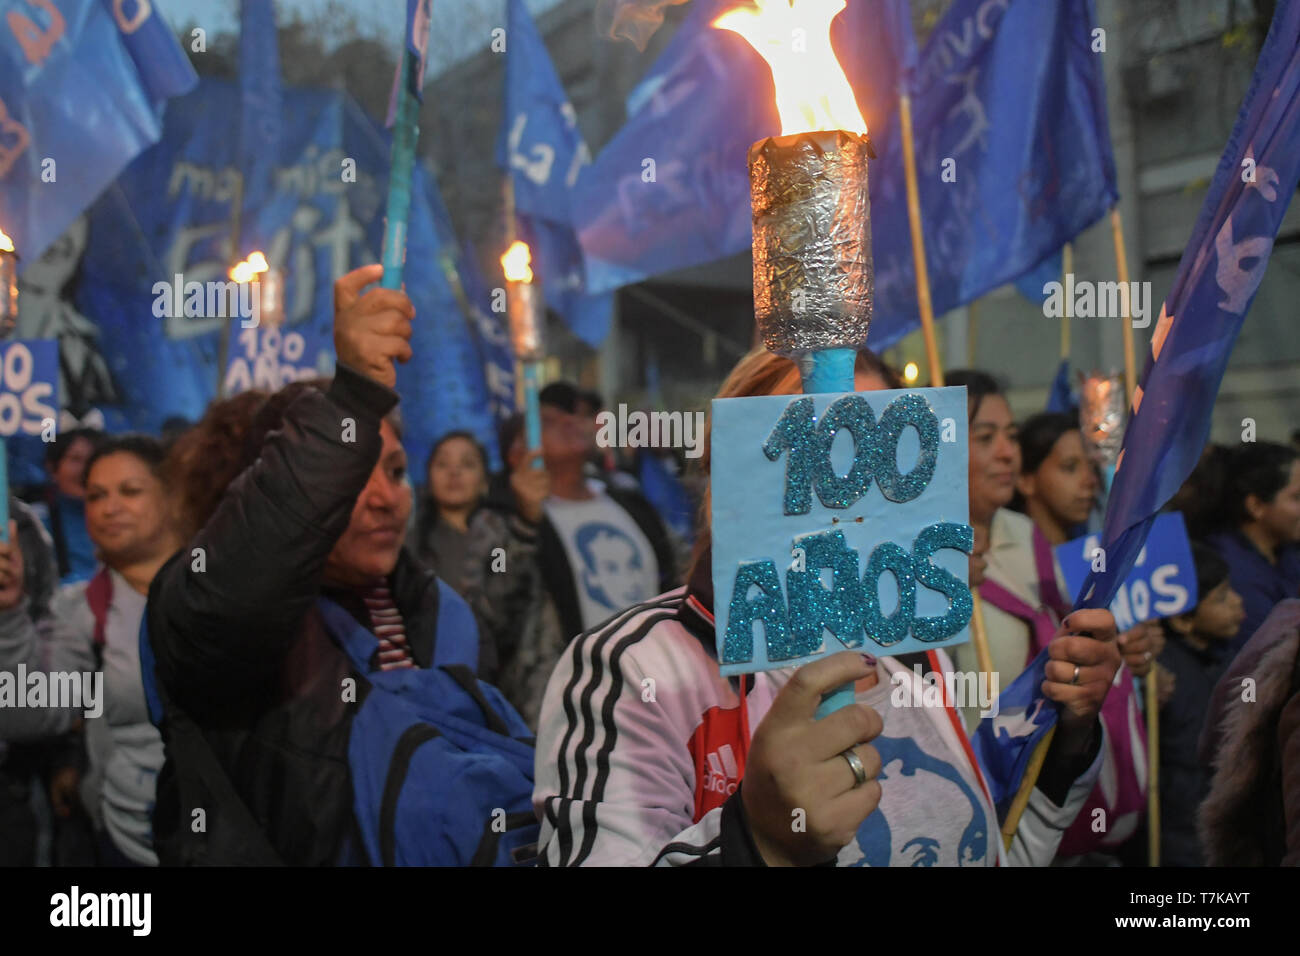 Buenos Aires, Buenos Aires, Argentina. 7th May, 2019. Social movements march with torches to commemorate the 100th anniversary of Evita's birth. Credit: Patricio Murphy/ZUMA Wire/Alamy Live News Stock Photo